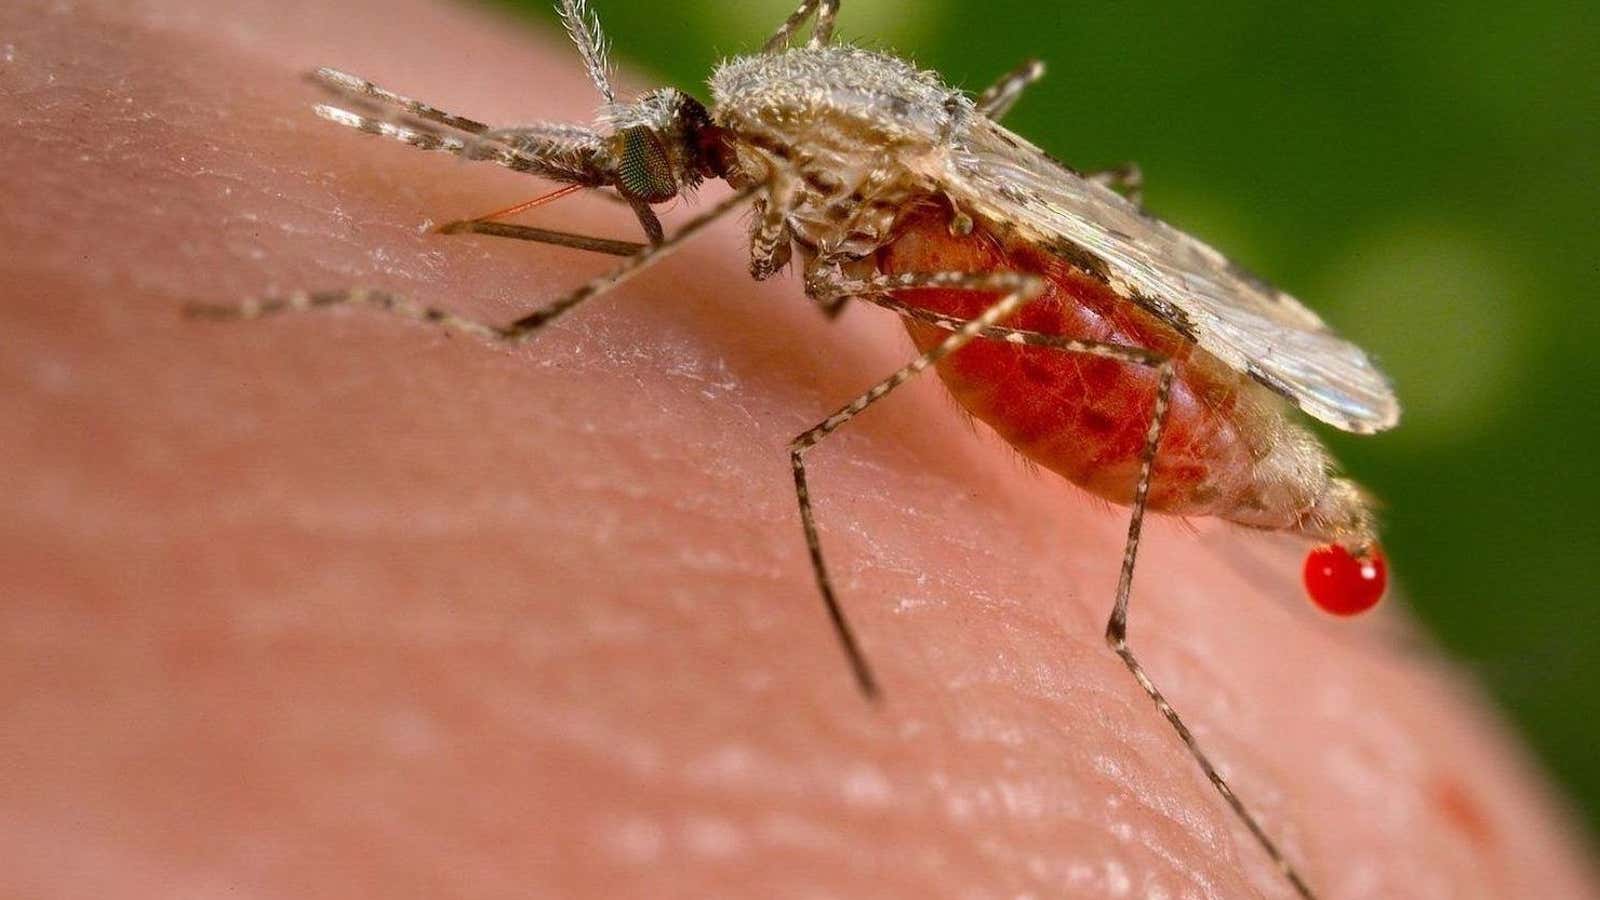 An Anopheles mosquito obtains a blood meal from a human host